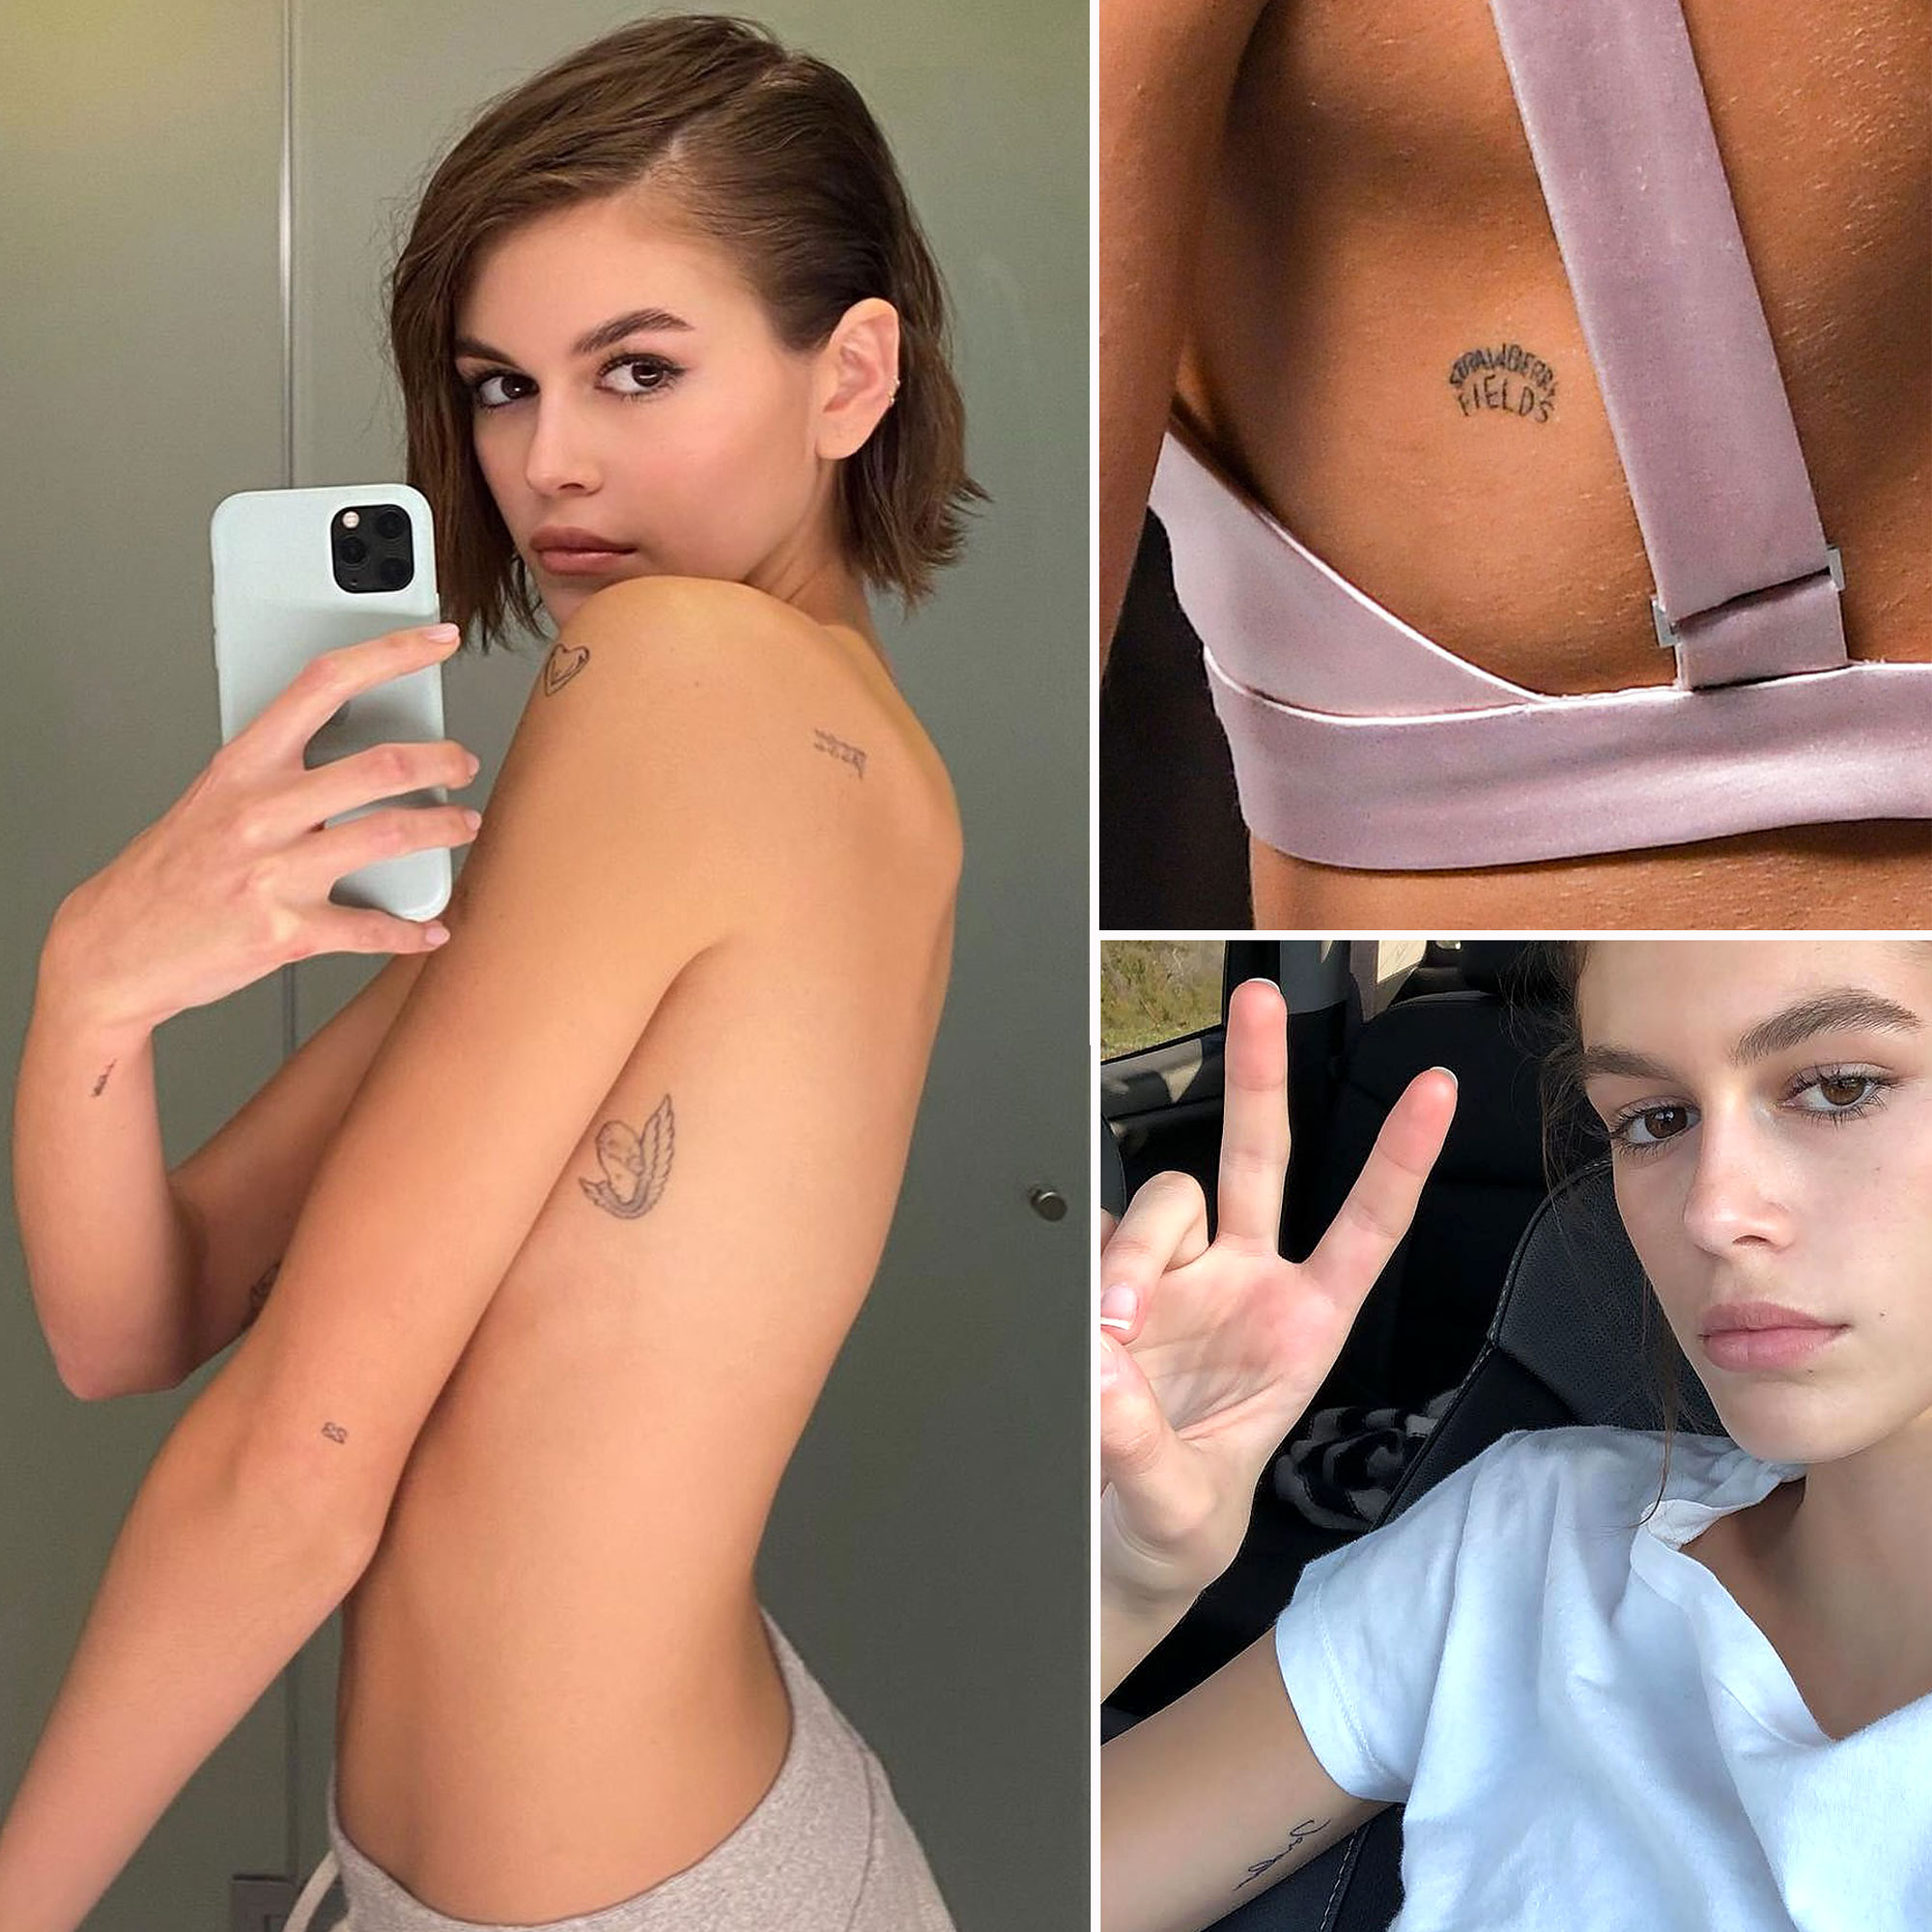 Cindy Crawfords model daughter Kaia Gerber 17 shows off a THIRD tattoo  while sunbathing  Daily Mail Online